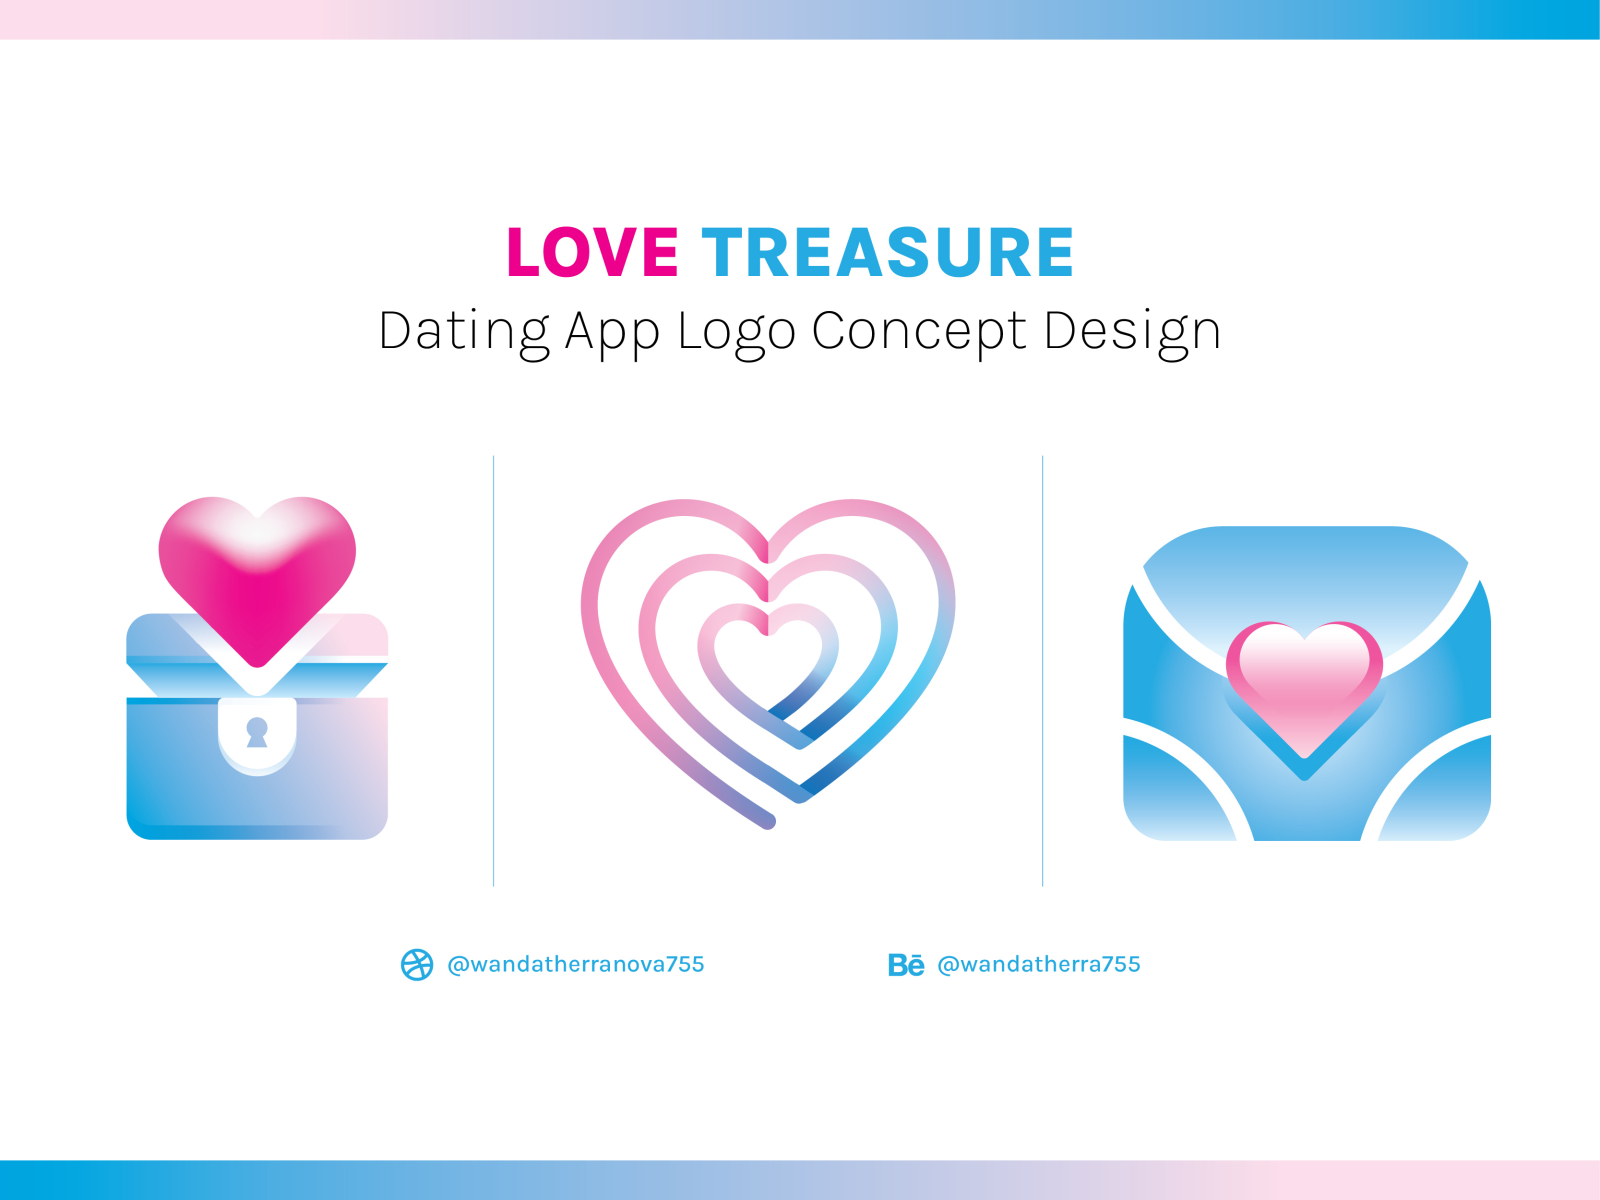 Facebook Dating App Icon Stock Photos - 73 Images | Shutterstock